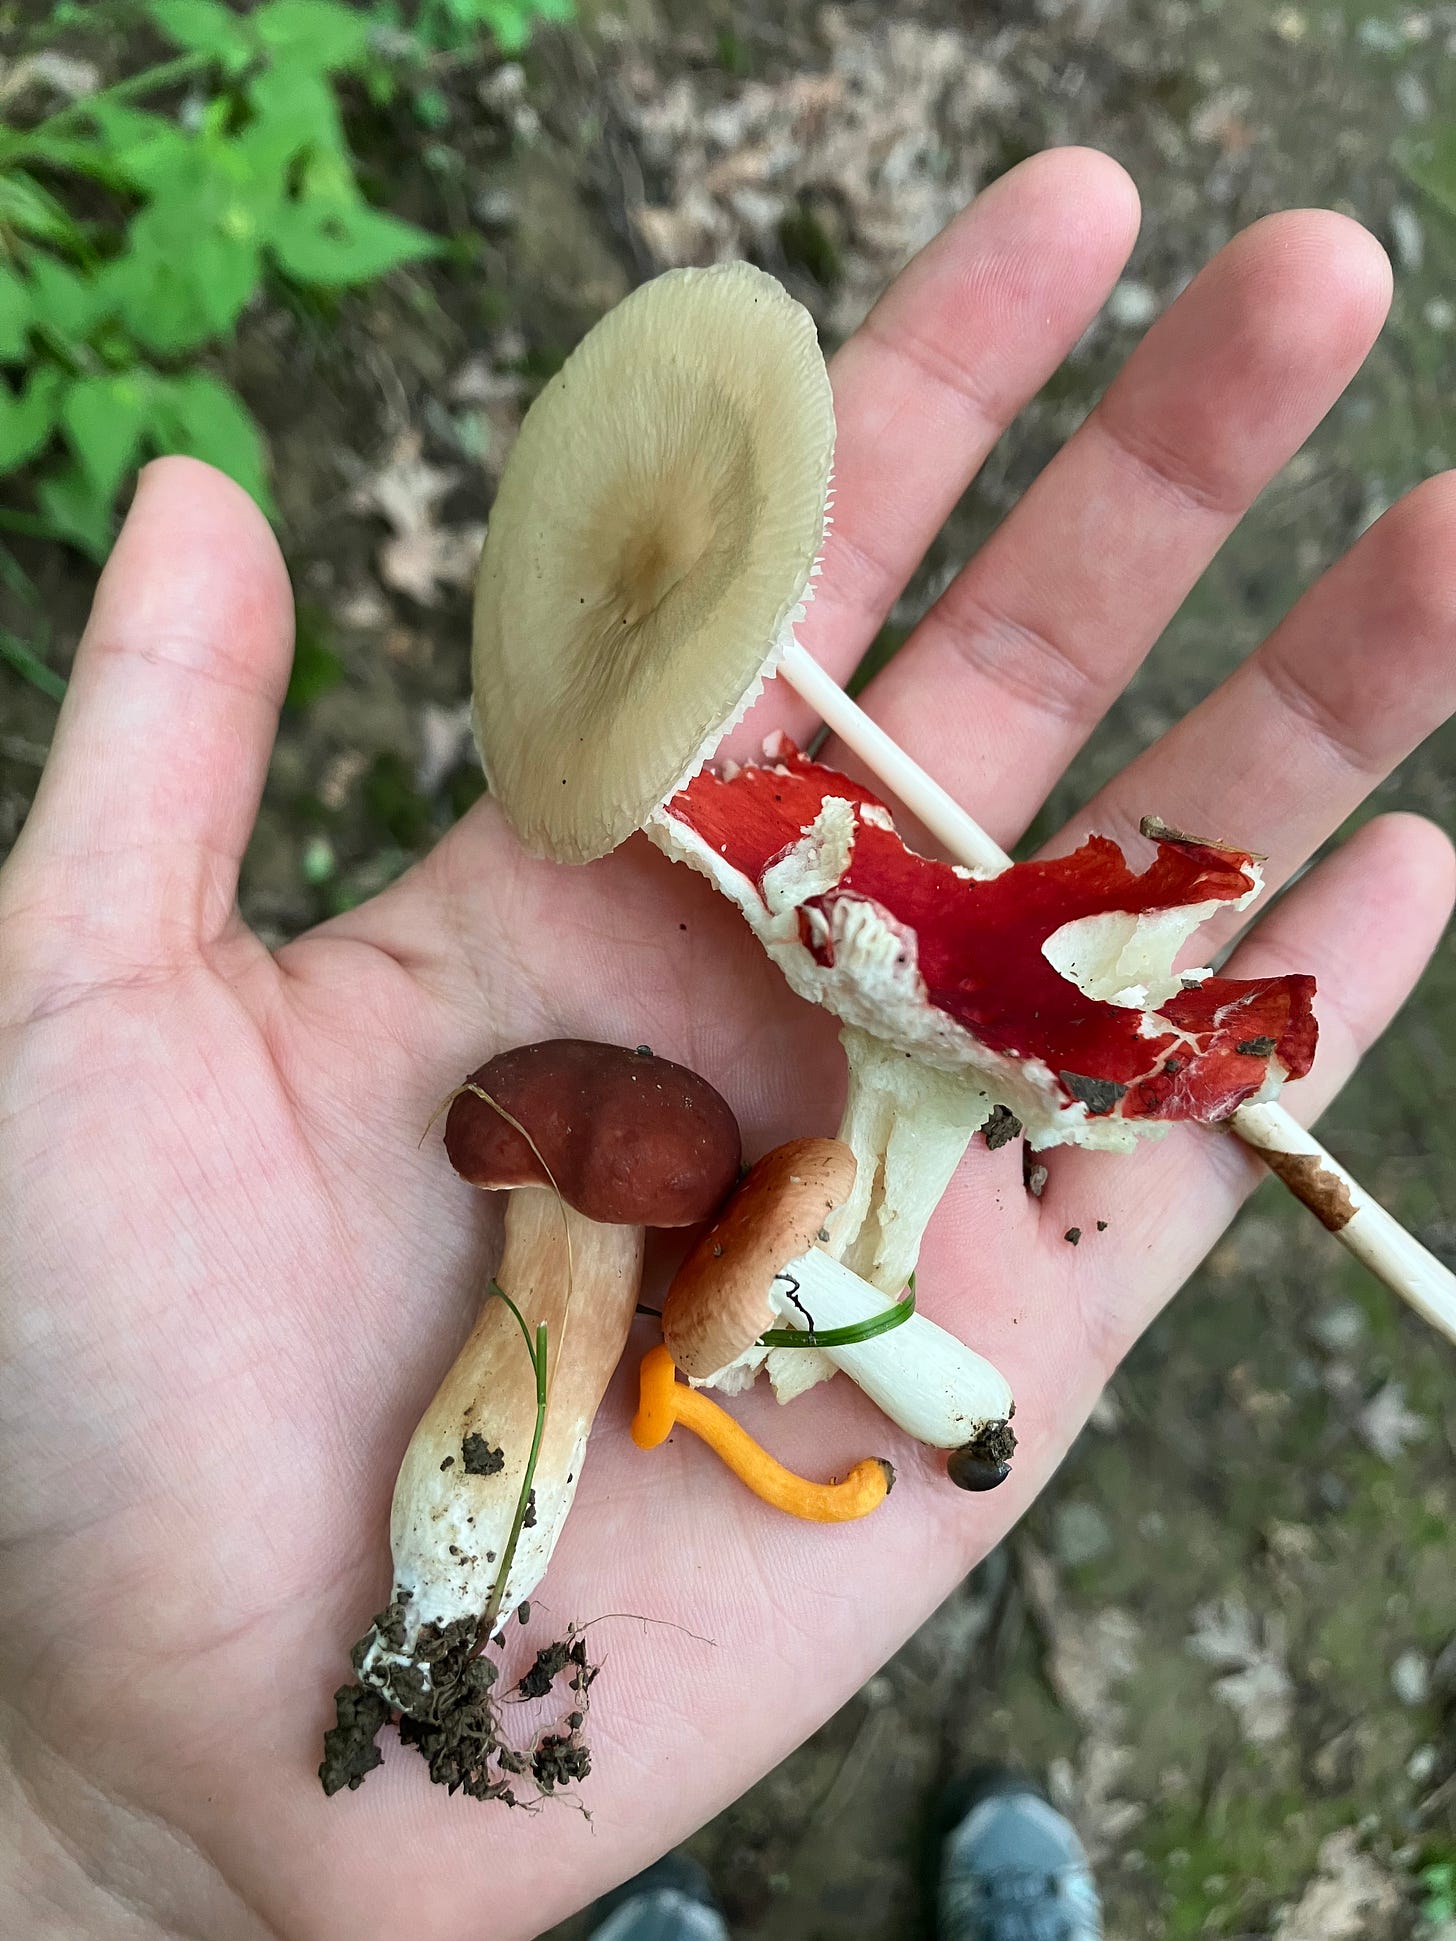 An open palm carries a variety of mushrooms in the forest